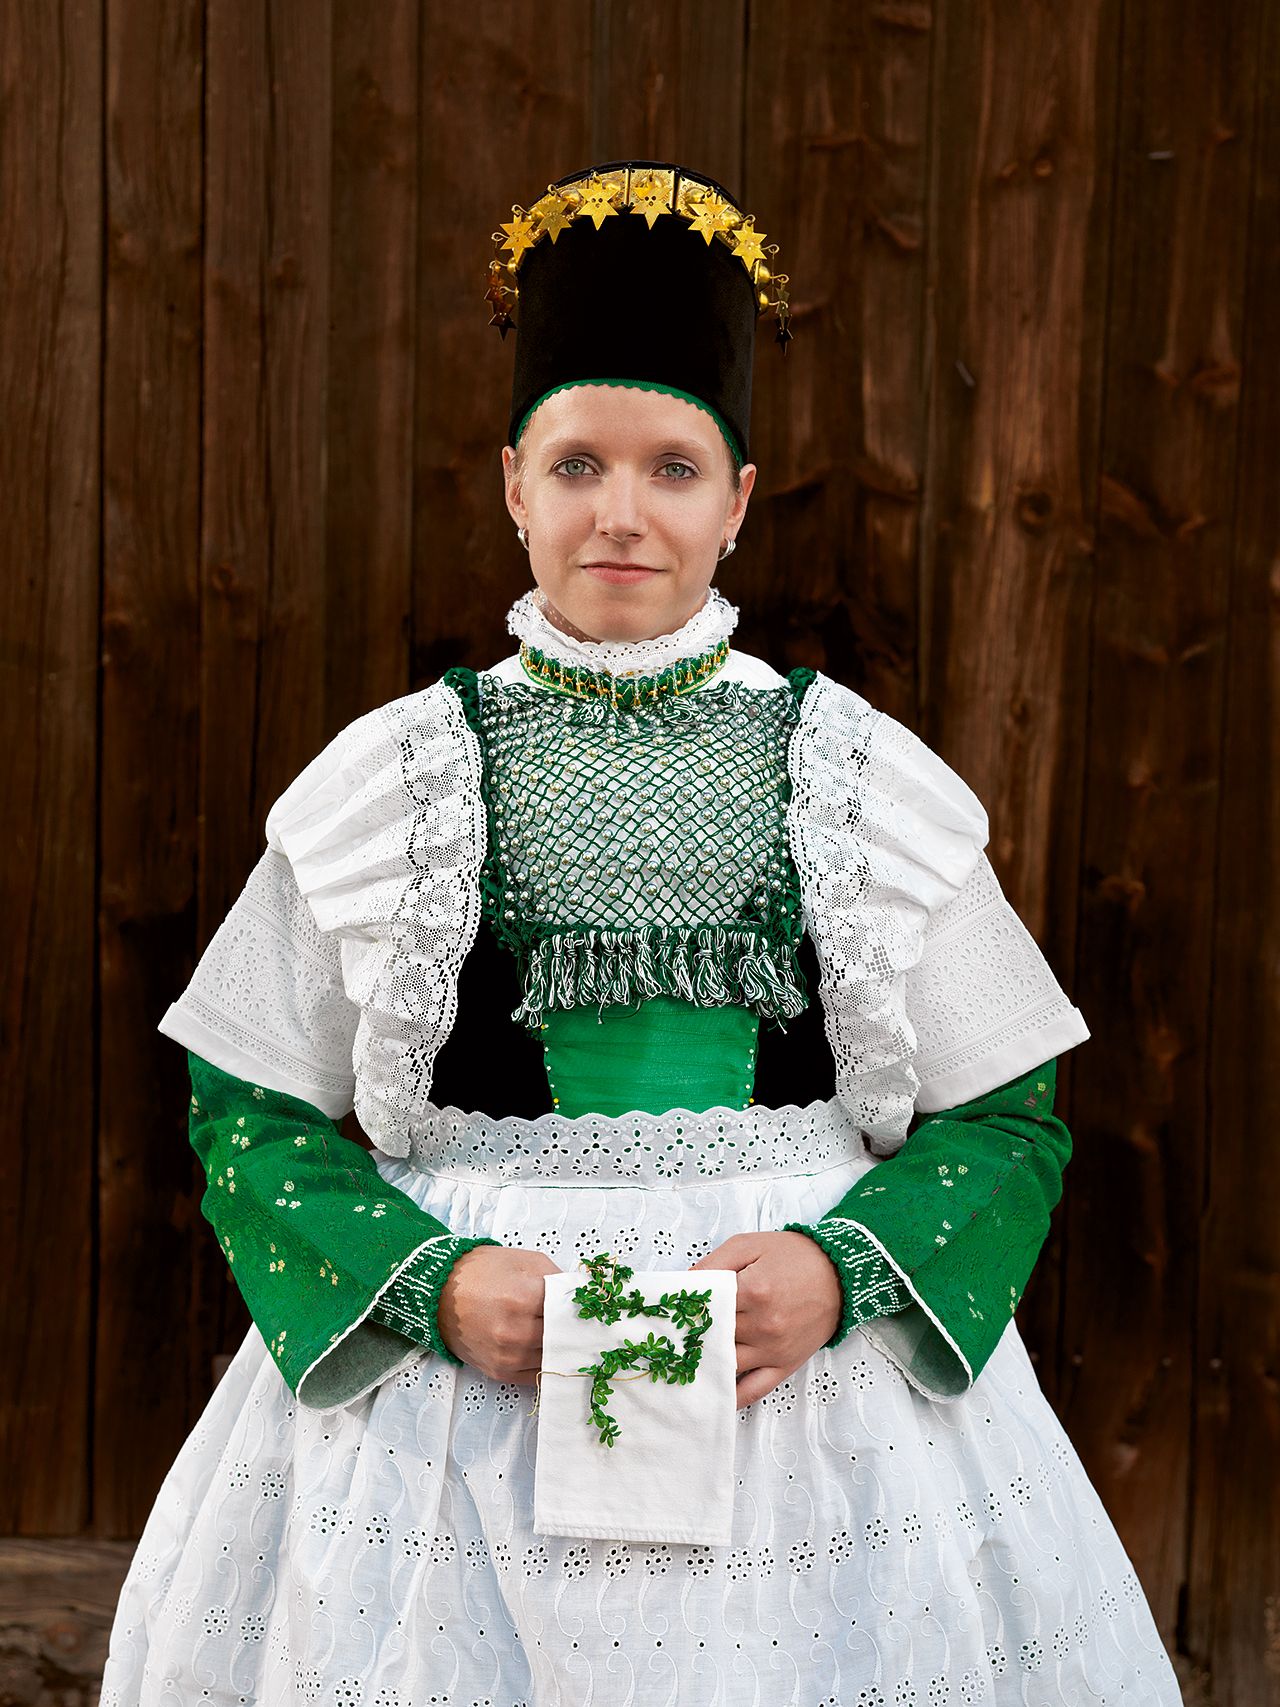 Sorbian Tracht
Saxony, Bröthen
Photo by Gregor Hohenberg
from 'Traditional Couture'
© Gestalten 2015.